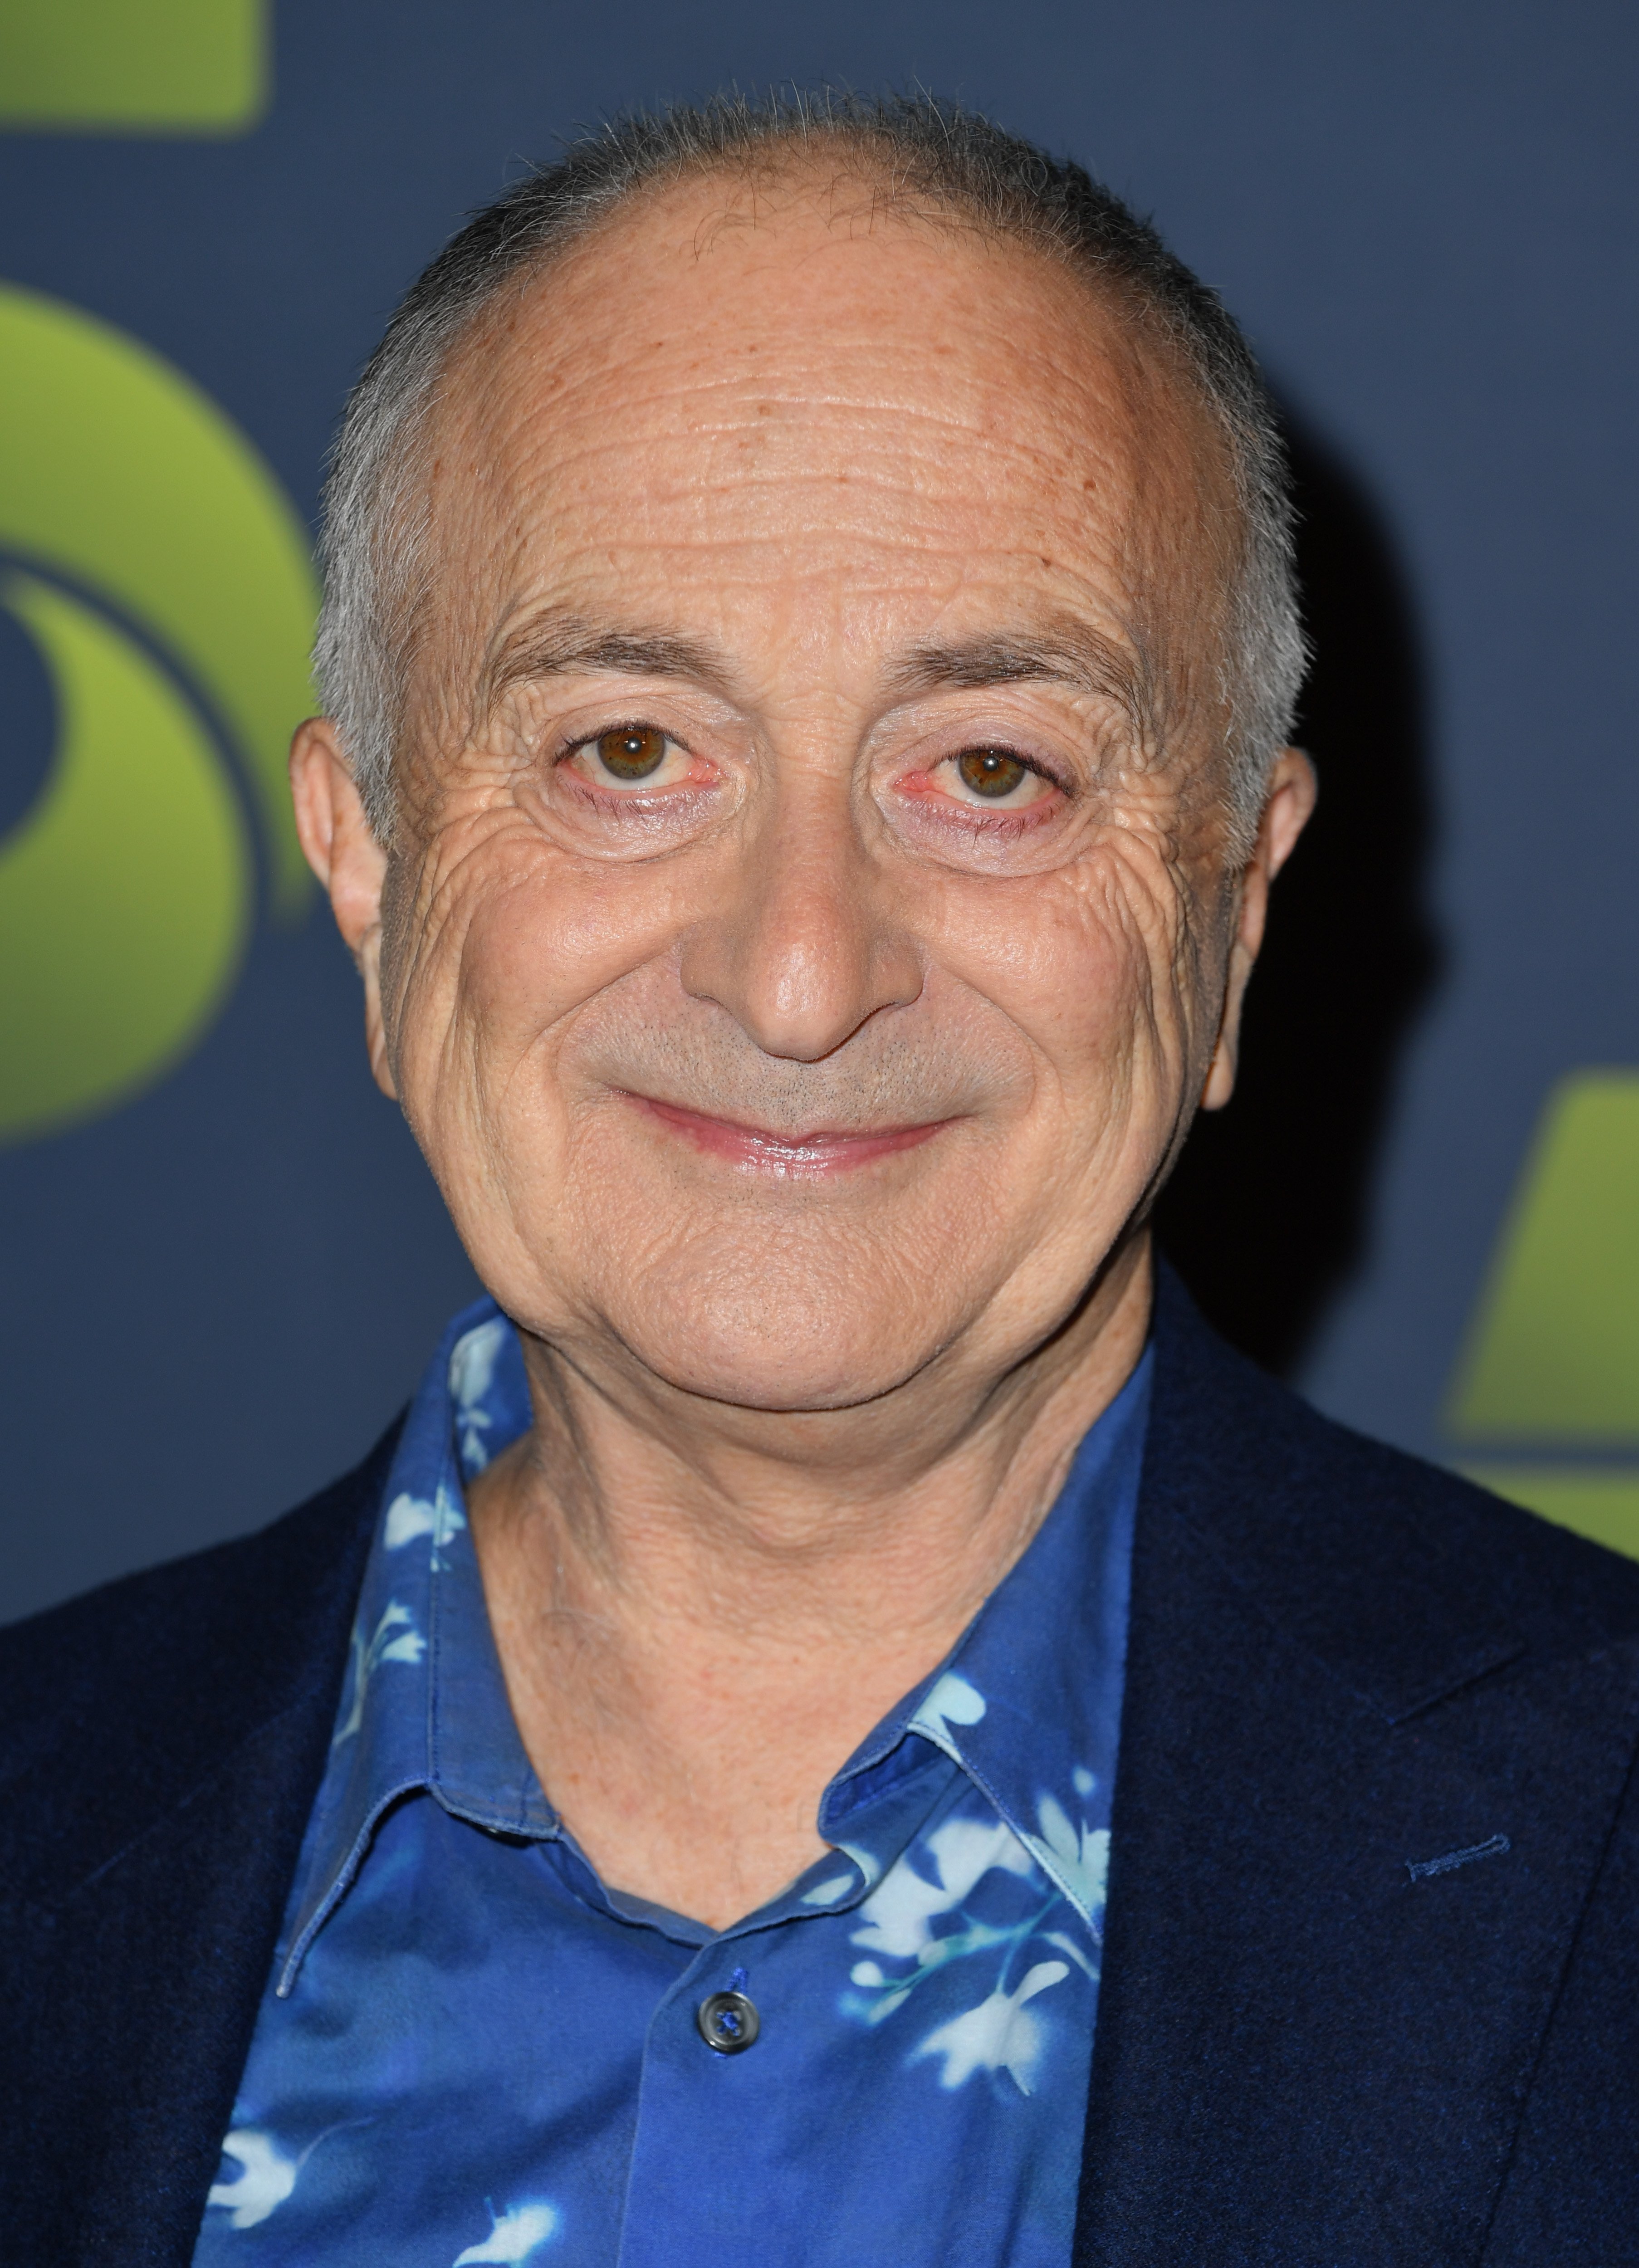 Tony Robinson attending the Channel 5 2020 Upfront photocall at St. Pancras Renaissance London Hotel on November 19, 2019 in London, England. / Source: Getty Images